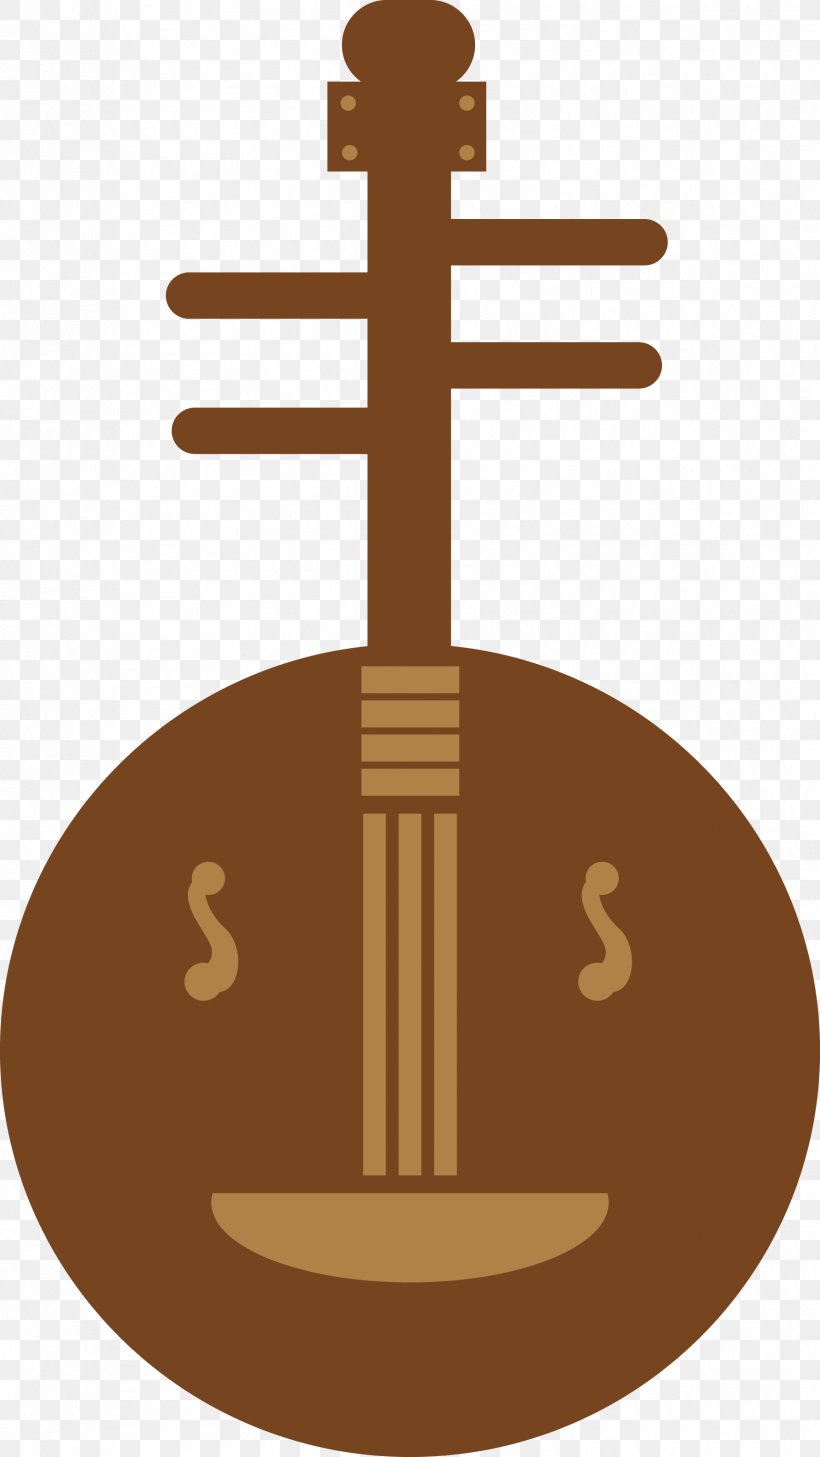 Yueqin Musical Instrument Silhouette, PNG, 1785x3173px, Yueqin, Accordion, Banjo, Musical Instrument, Plucked String Instrument Download Free